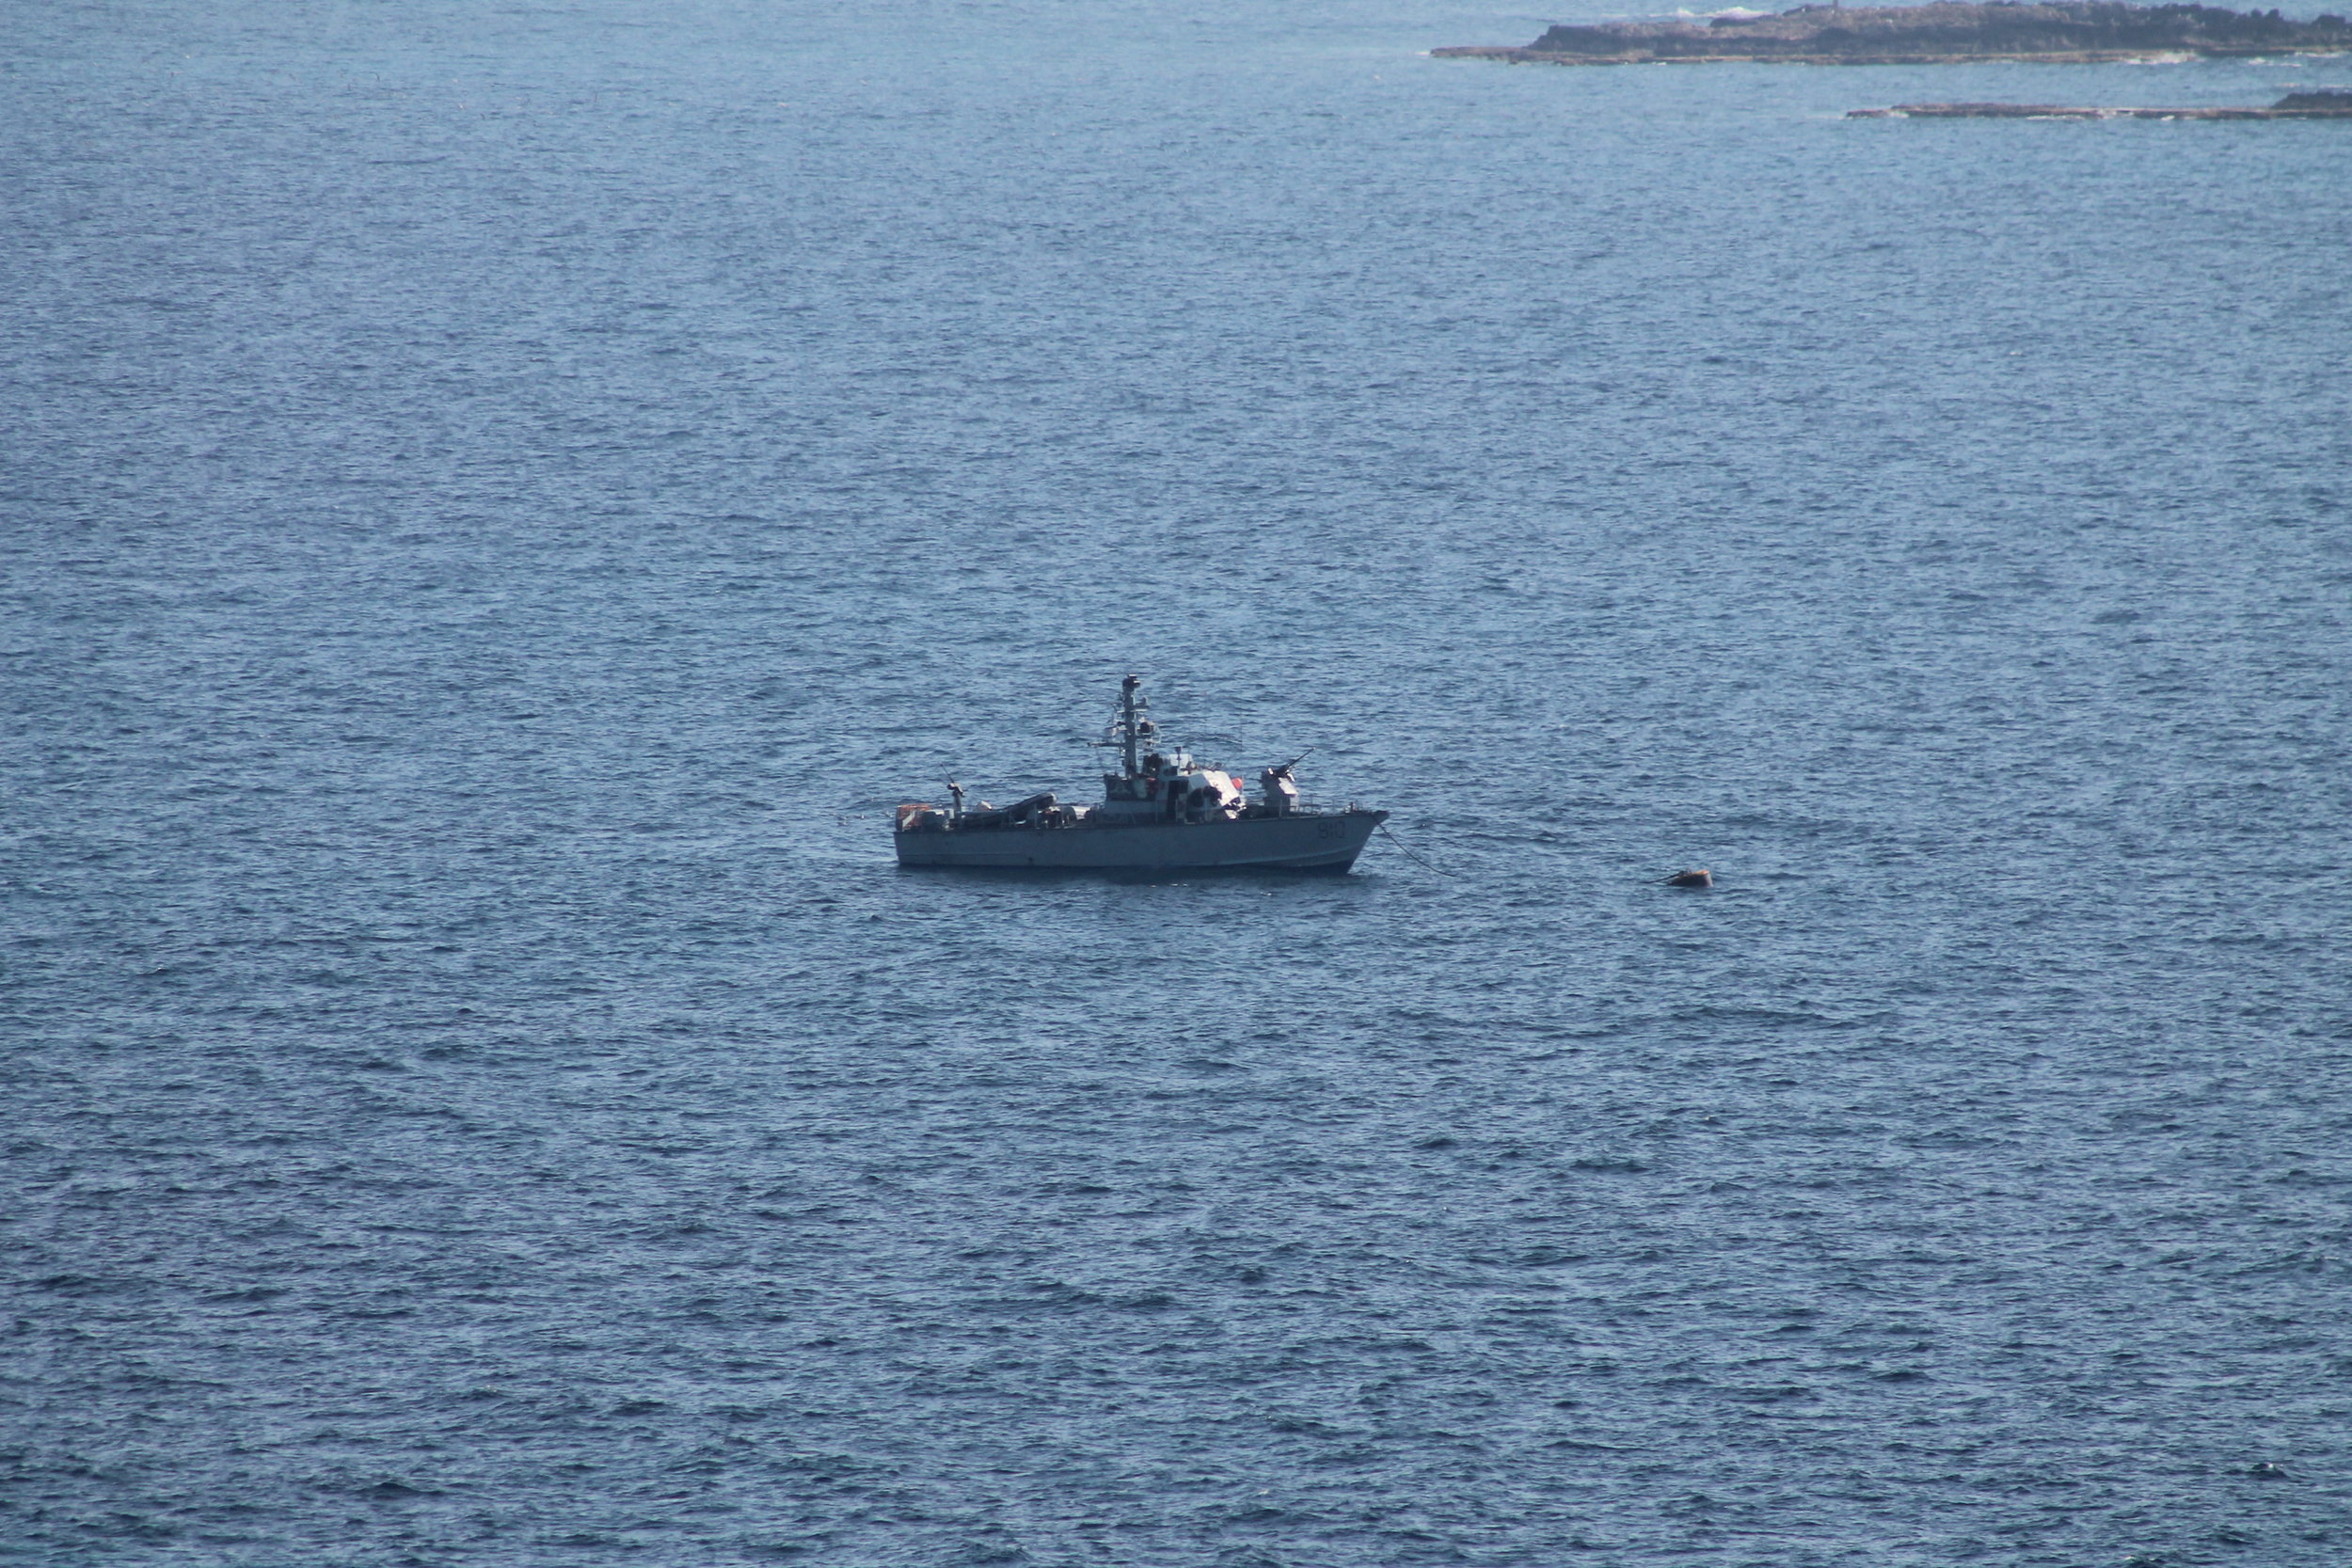 An Israeli warship keeping watch over the border with Lebanon.